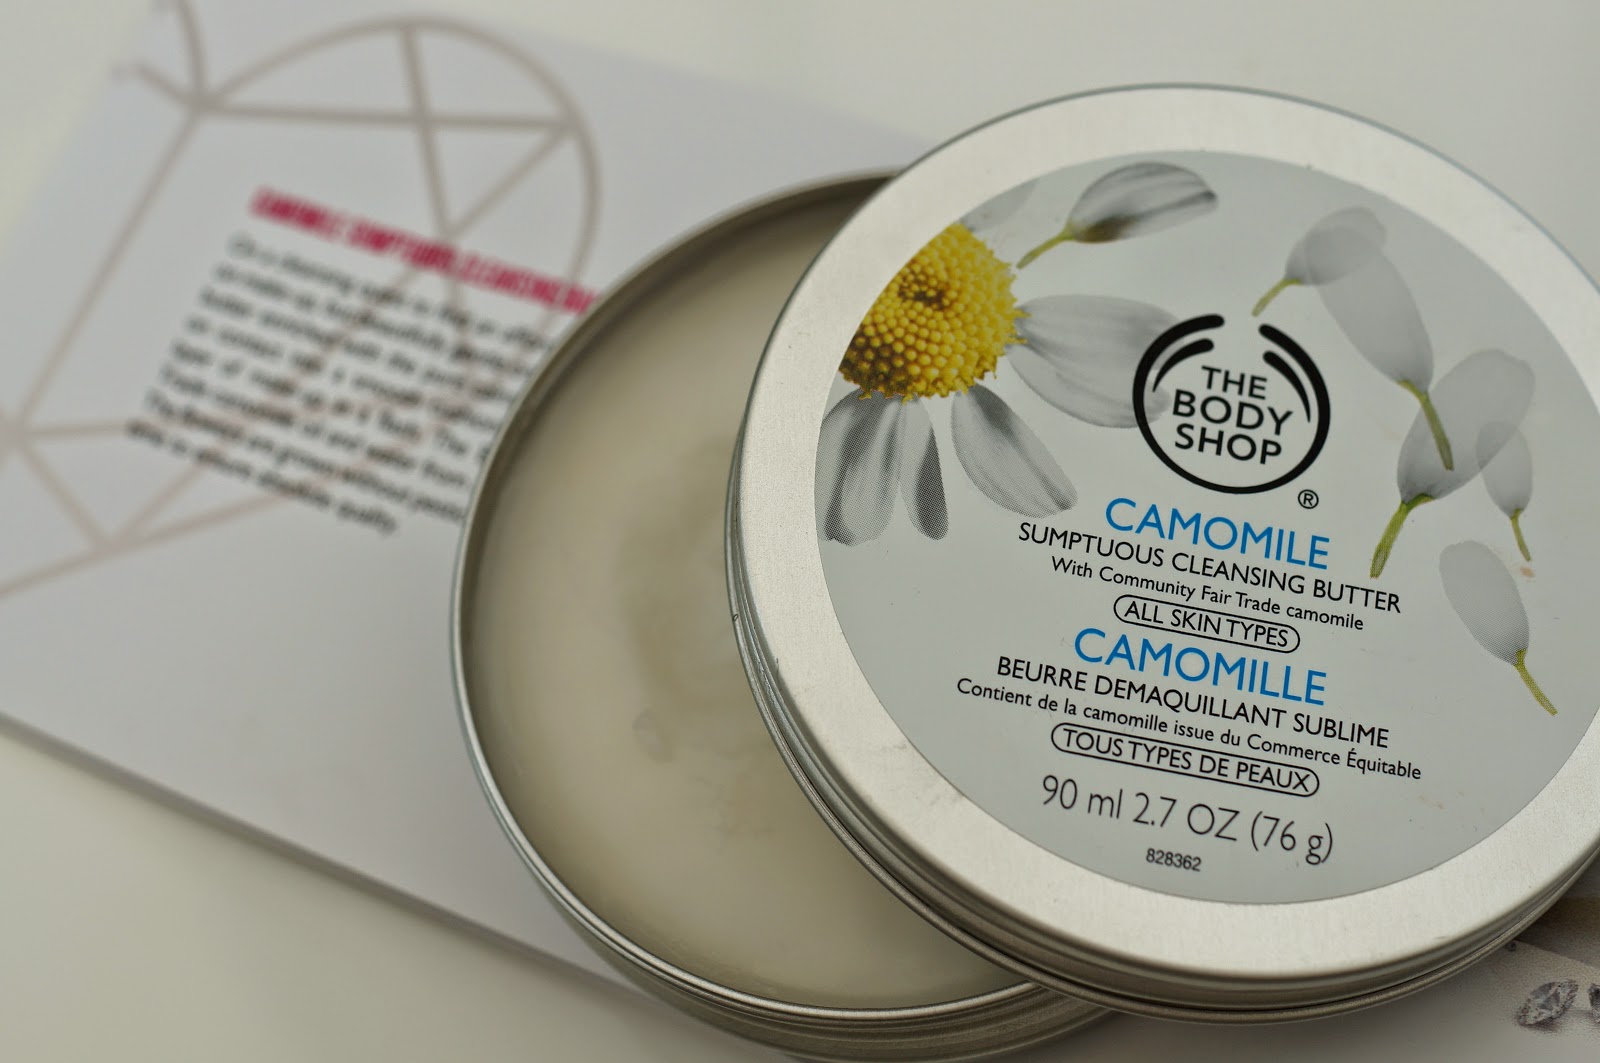 The Body Shop camomile cleansing butter